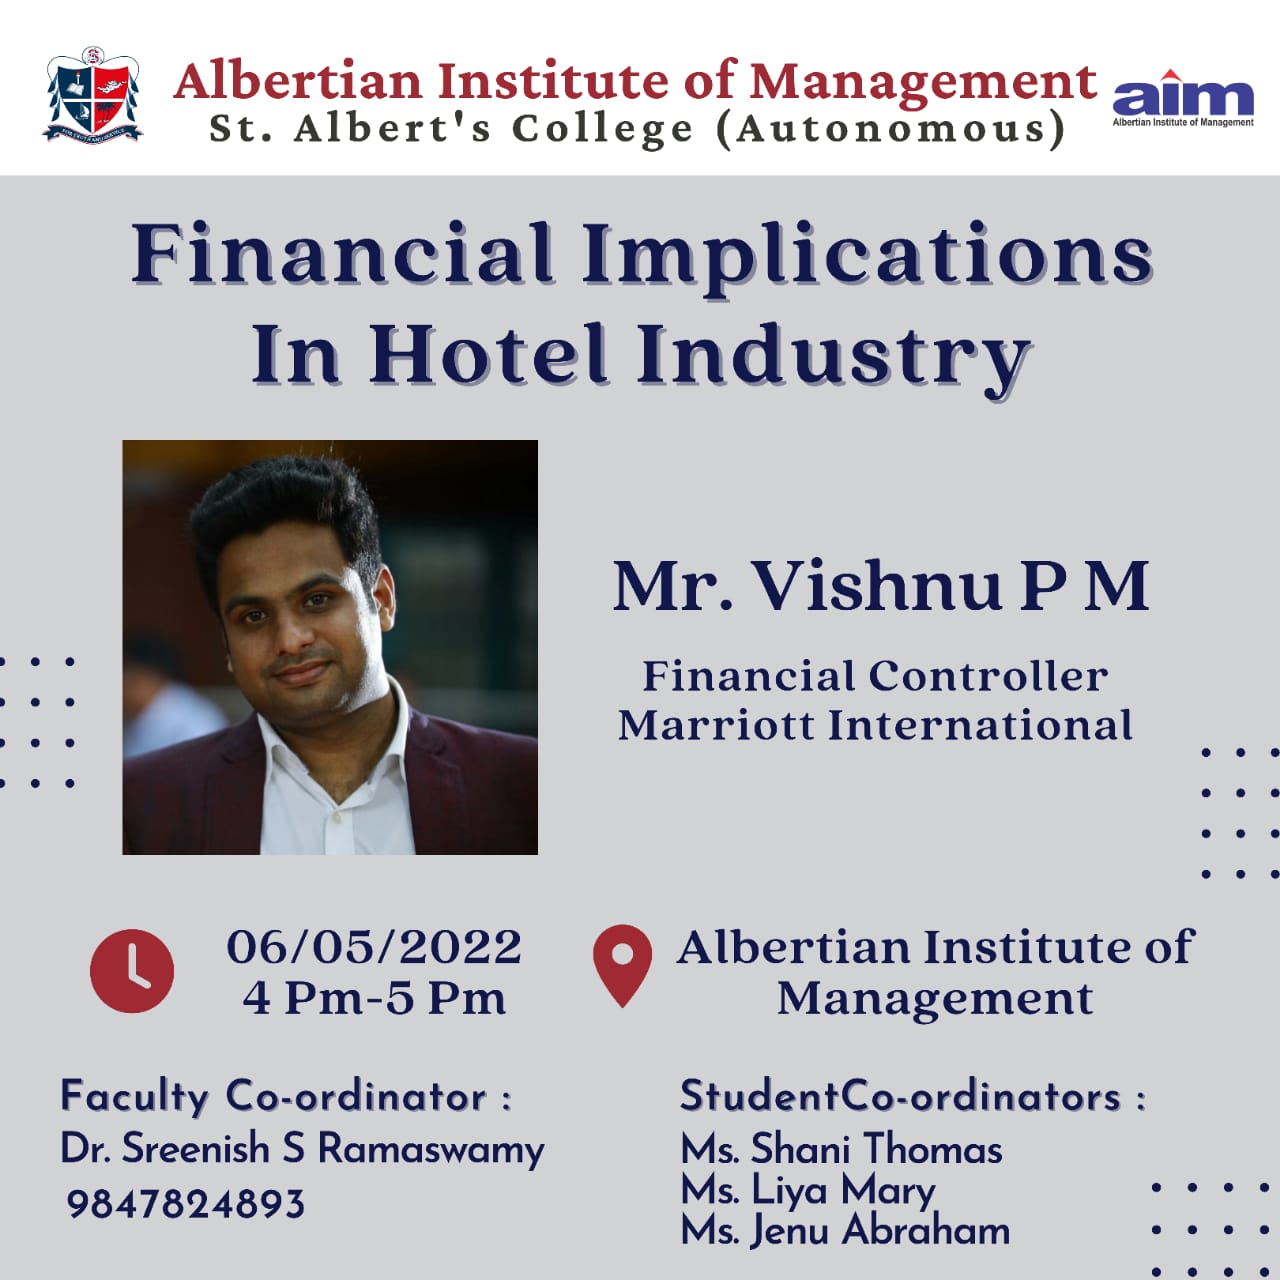 Financial Implications in Hotel Industry